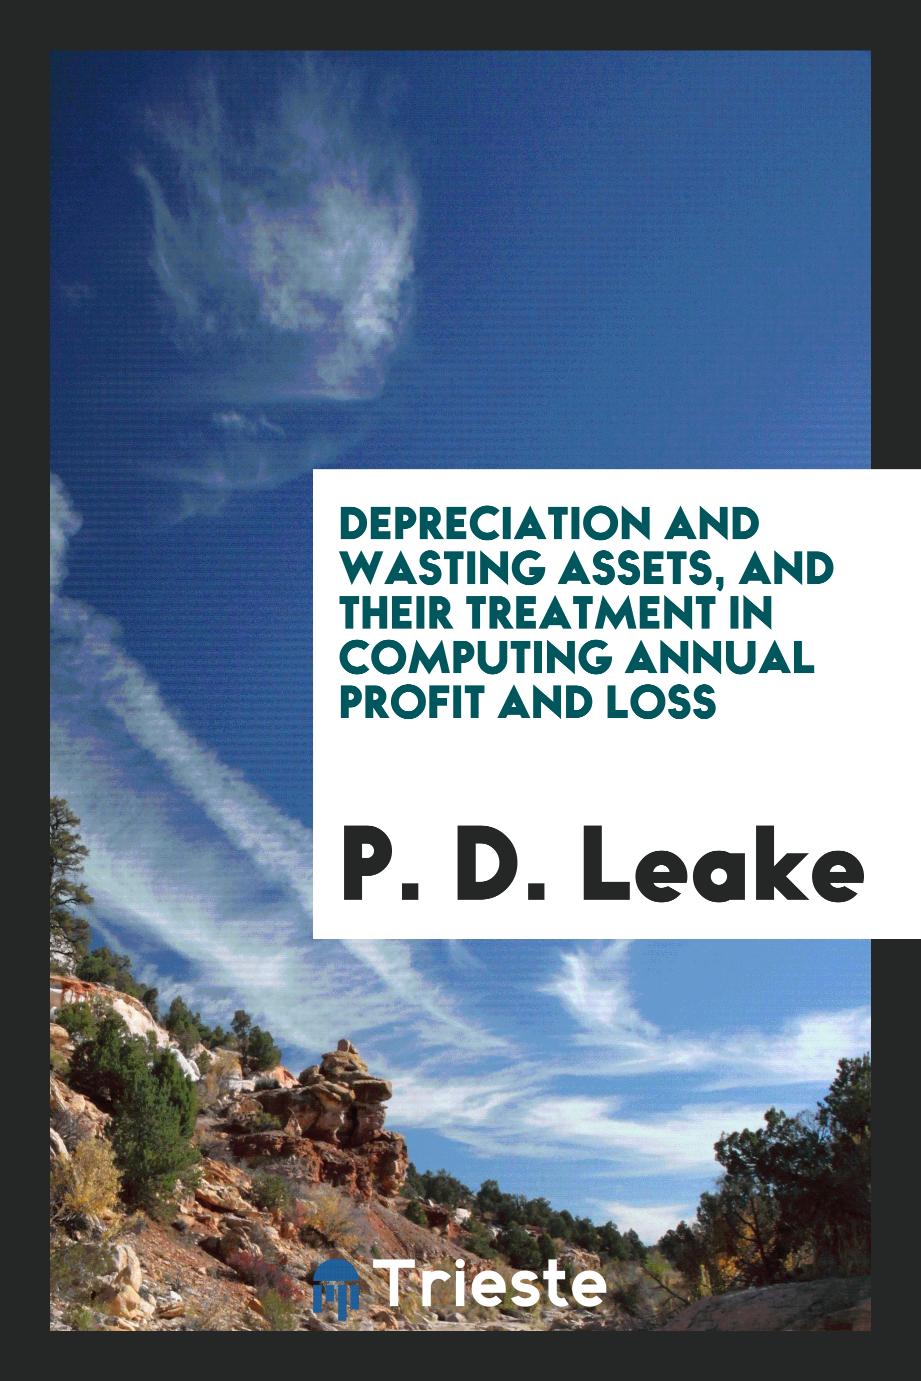 Depreciation and wasting assets, and their treatment in computing annual profit and loss